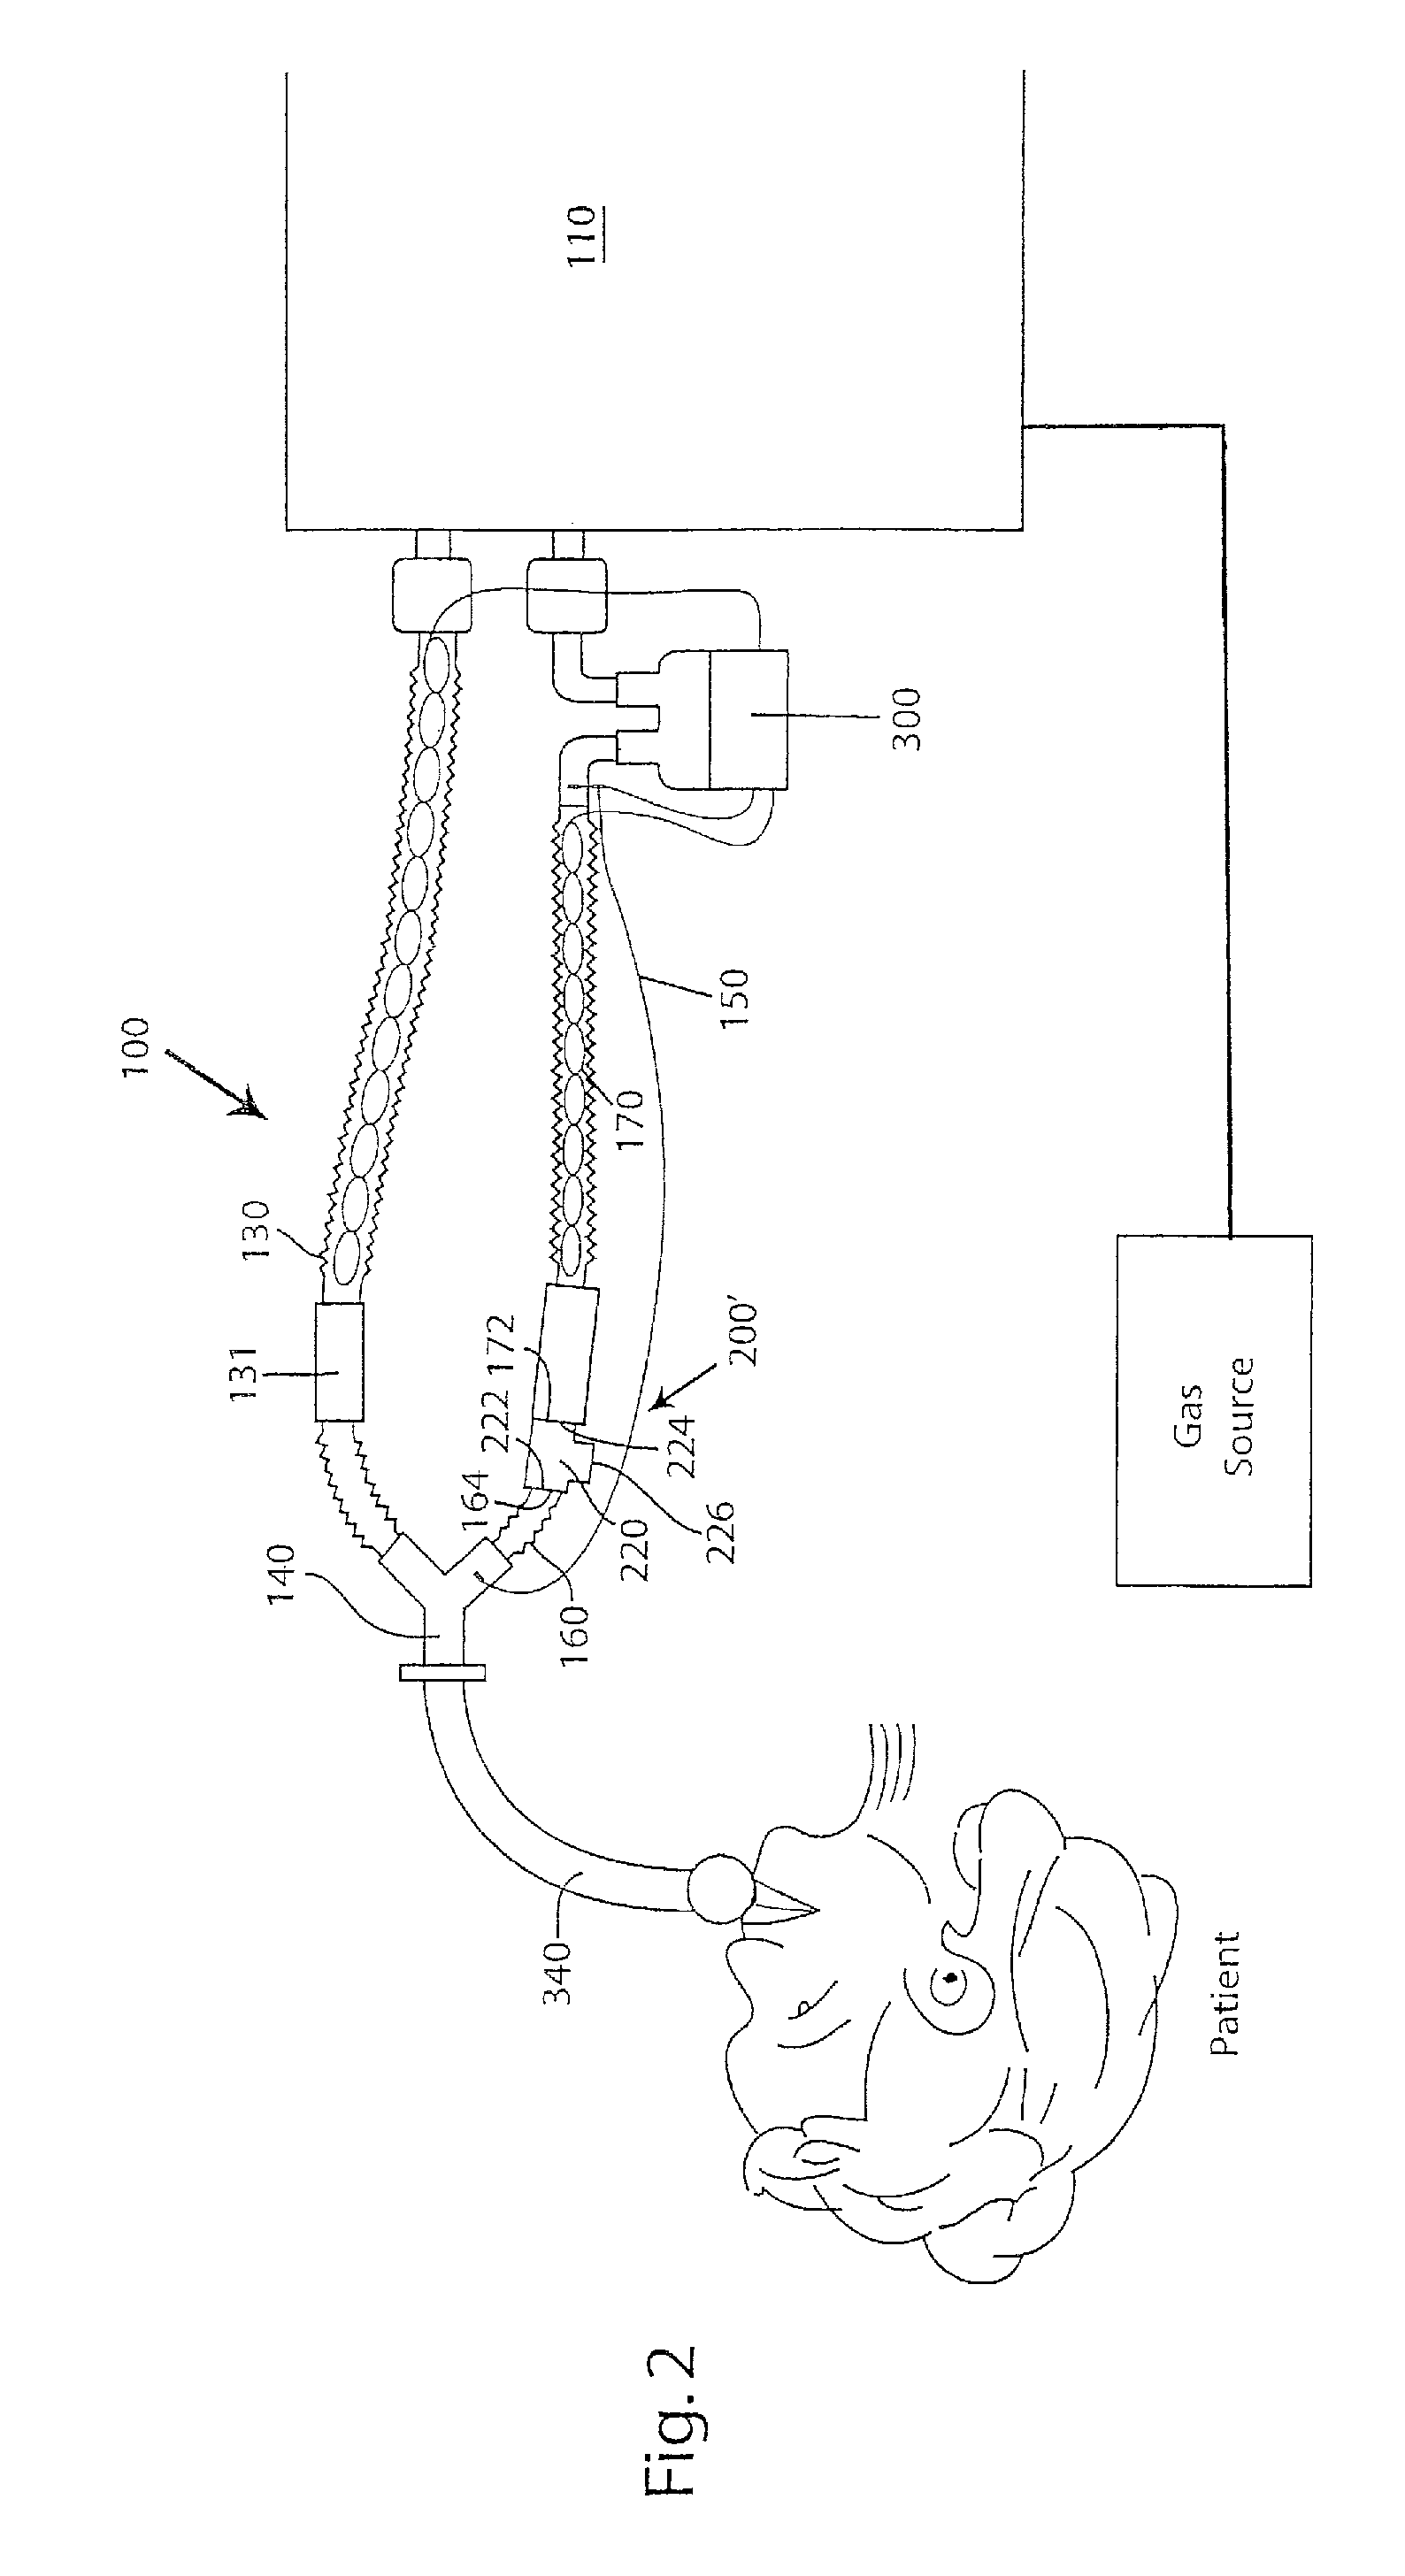 Patient interface assemblies for use in ventilator systems to deliver medication to a patient